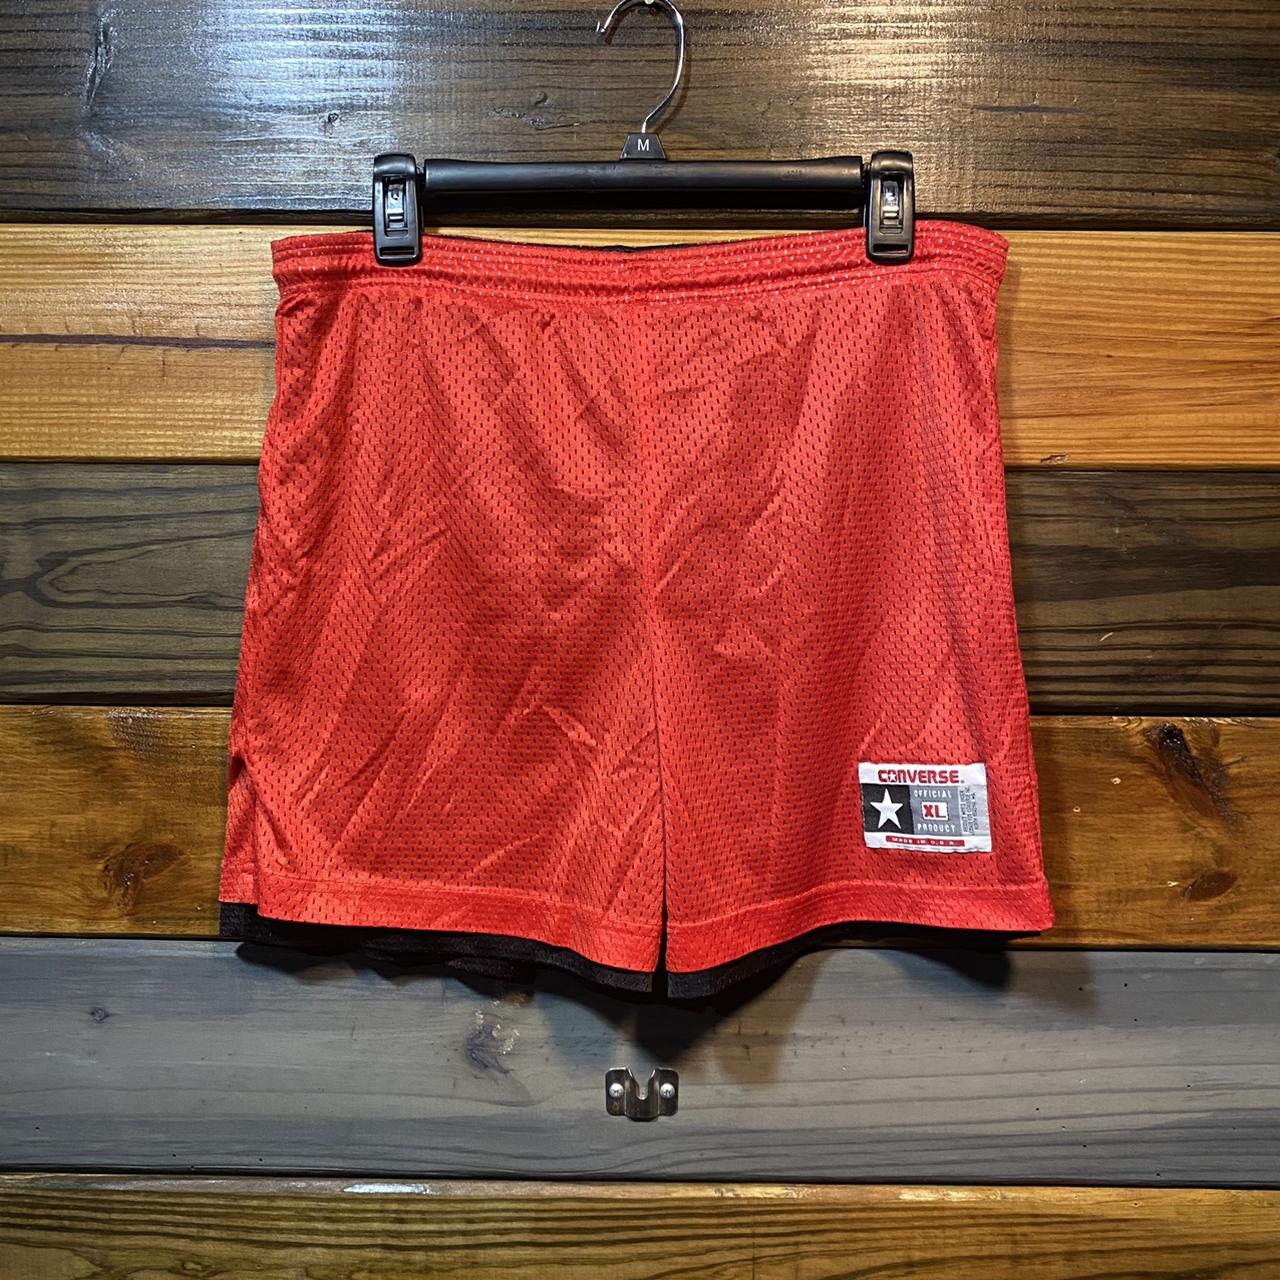 Converse Men's Red and Black Shorts